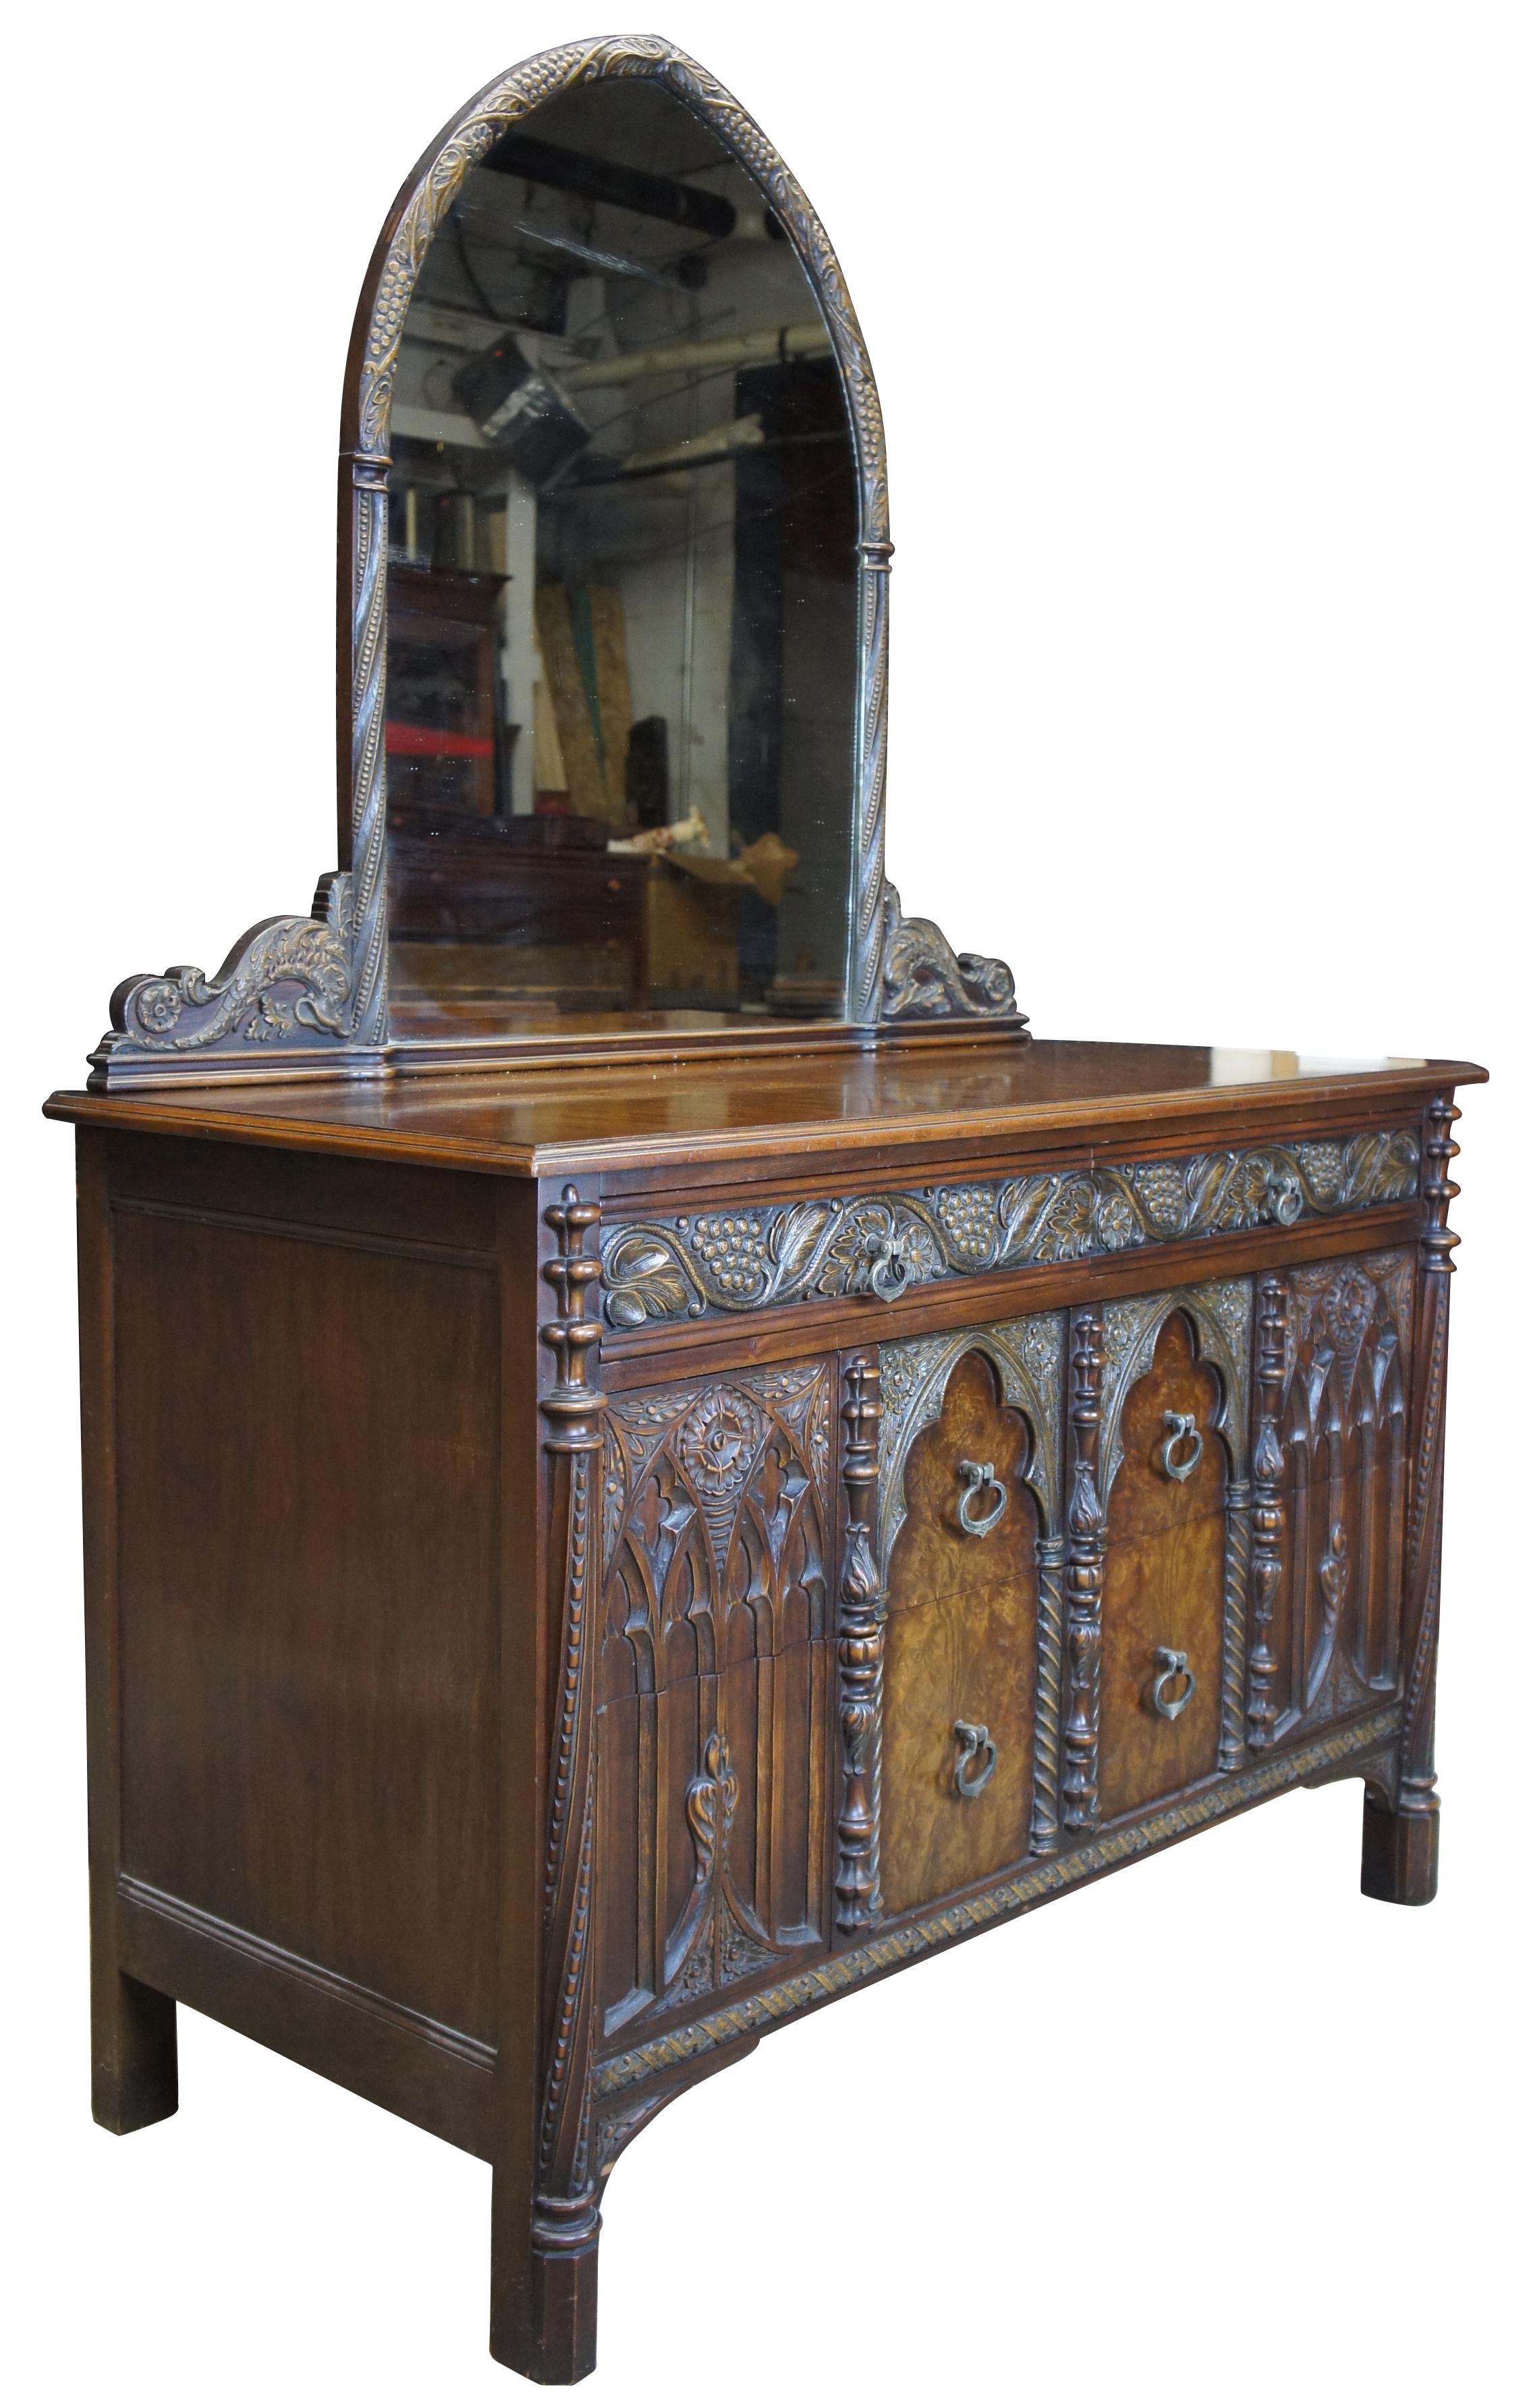 American Furniture Company Gothic or Spanish Renaissance Revival dresser and mirror. Operating out of Batesville Indiana since 1899, they worked closely and collaborated in part with Romweber. Specializing in high grade bedroom suites & furniture.